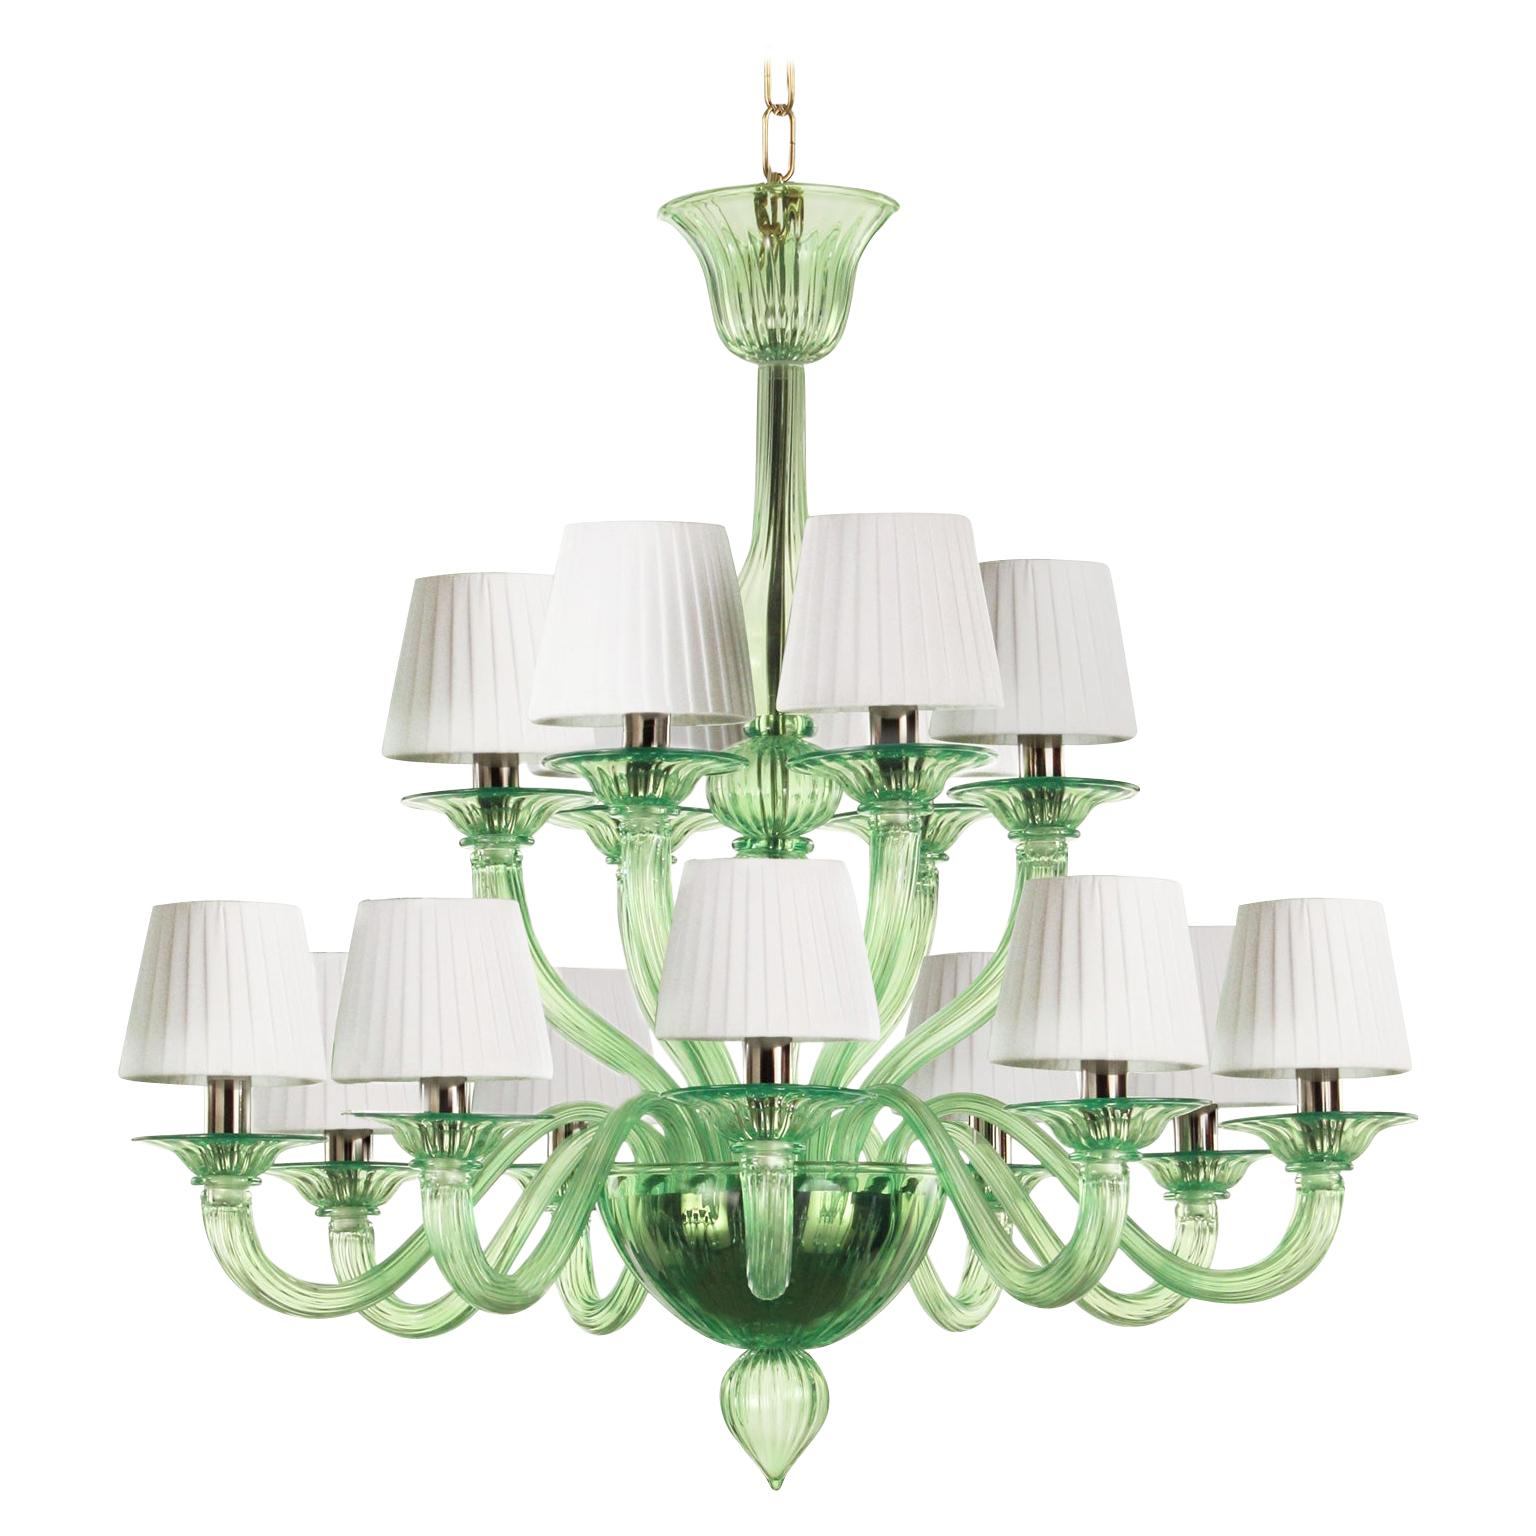 21st Century artistic Chandelier 9+6arms Green Murano Glass by Multiforme For Sale